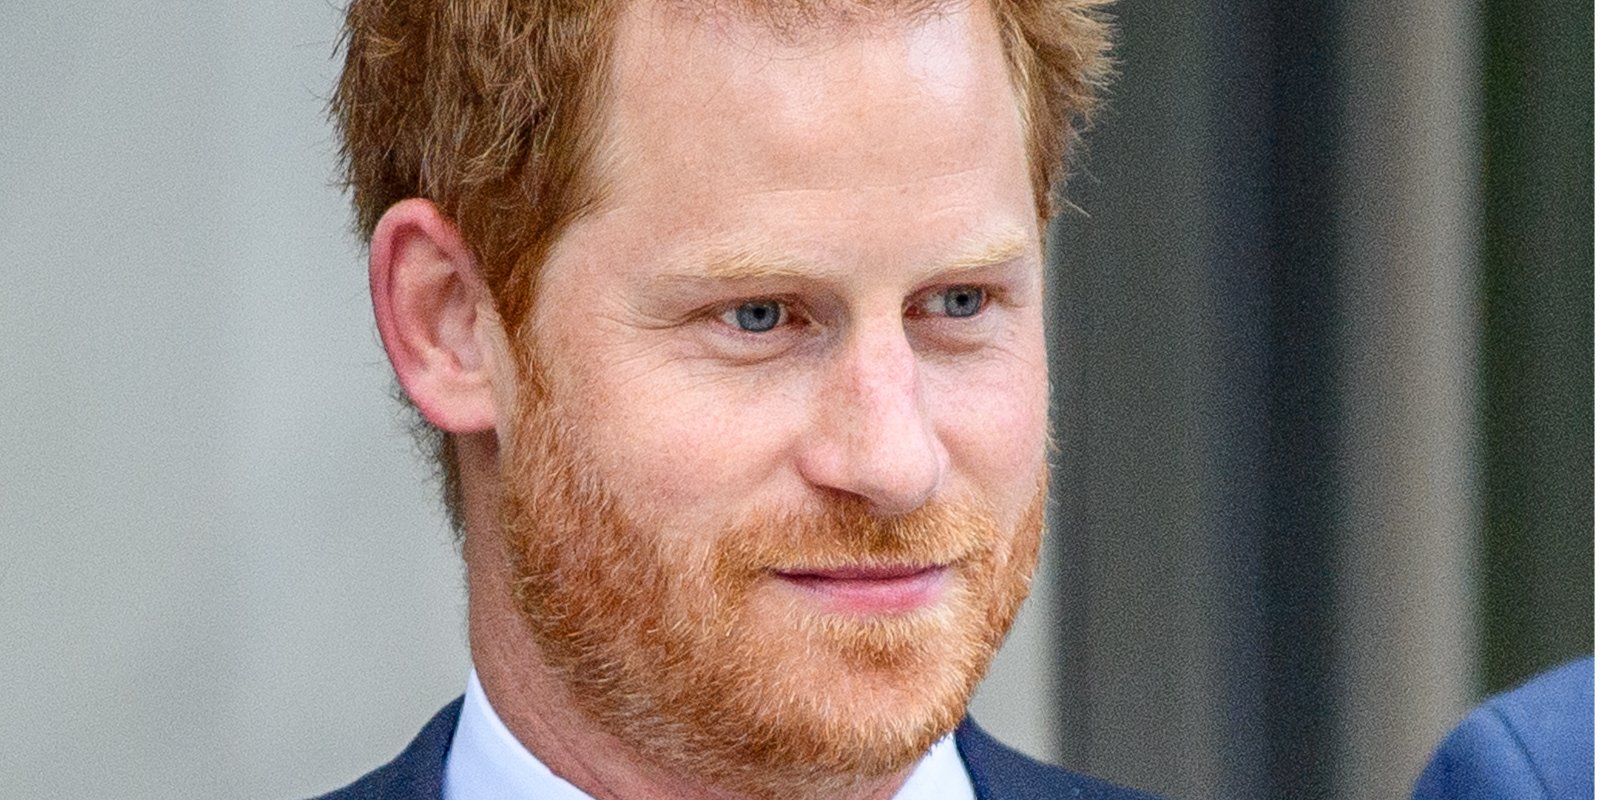 Prince Harry, Duke of Sussex visits One World Observatory on September 23, 2021 in New York City.